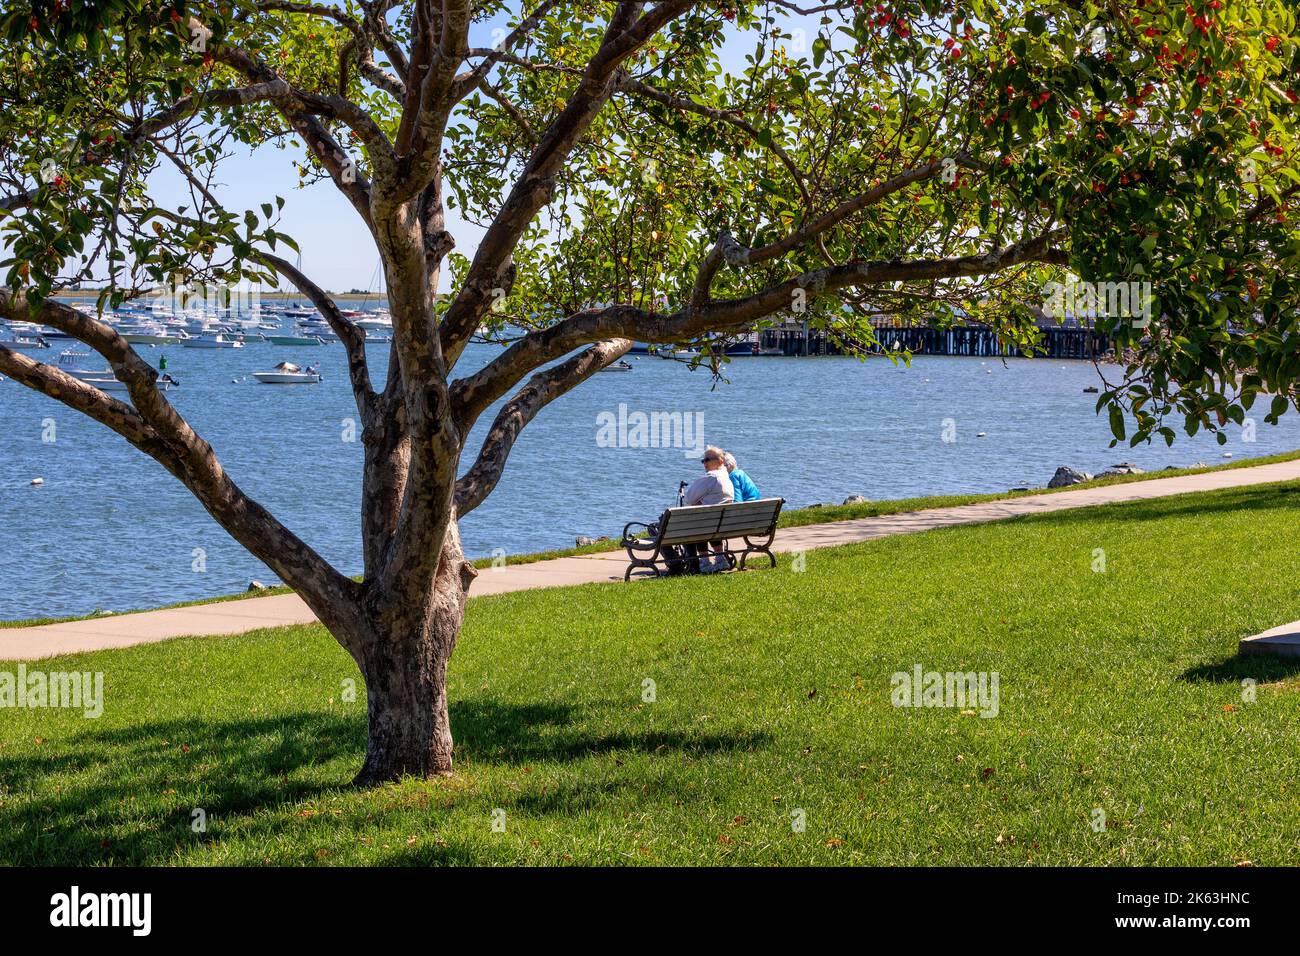 Plymouth, Massachusetts, USA - September 15, 2022: Two people sit on a bench enjoying the view of the harbor on a sunny fall day. Stock Photo